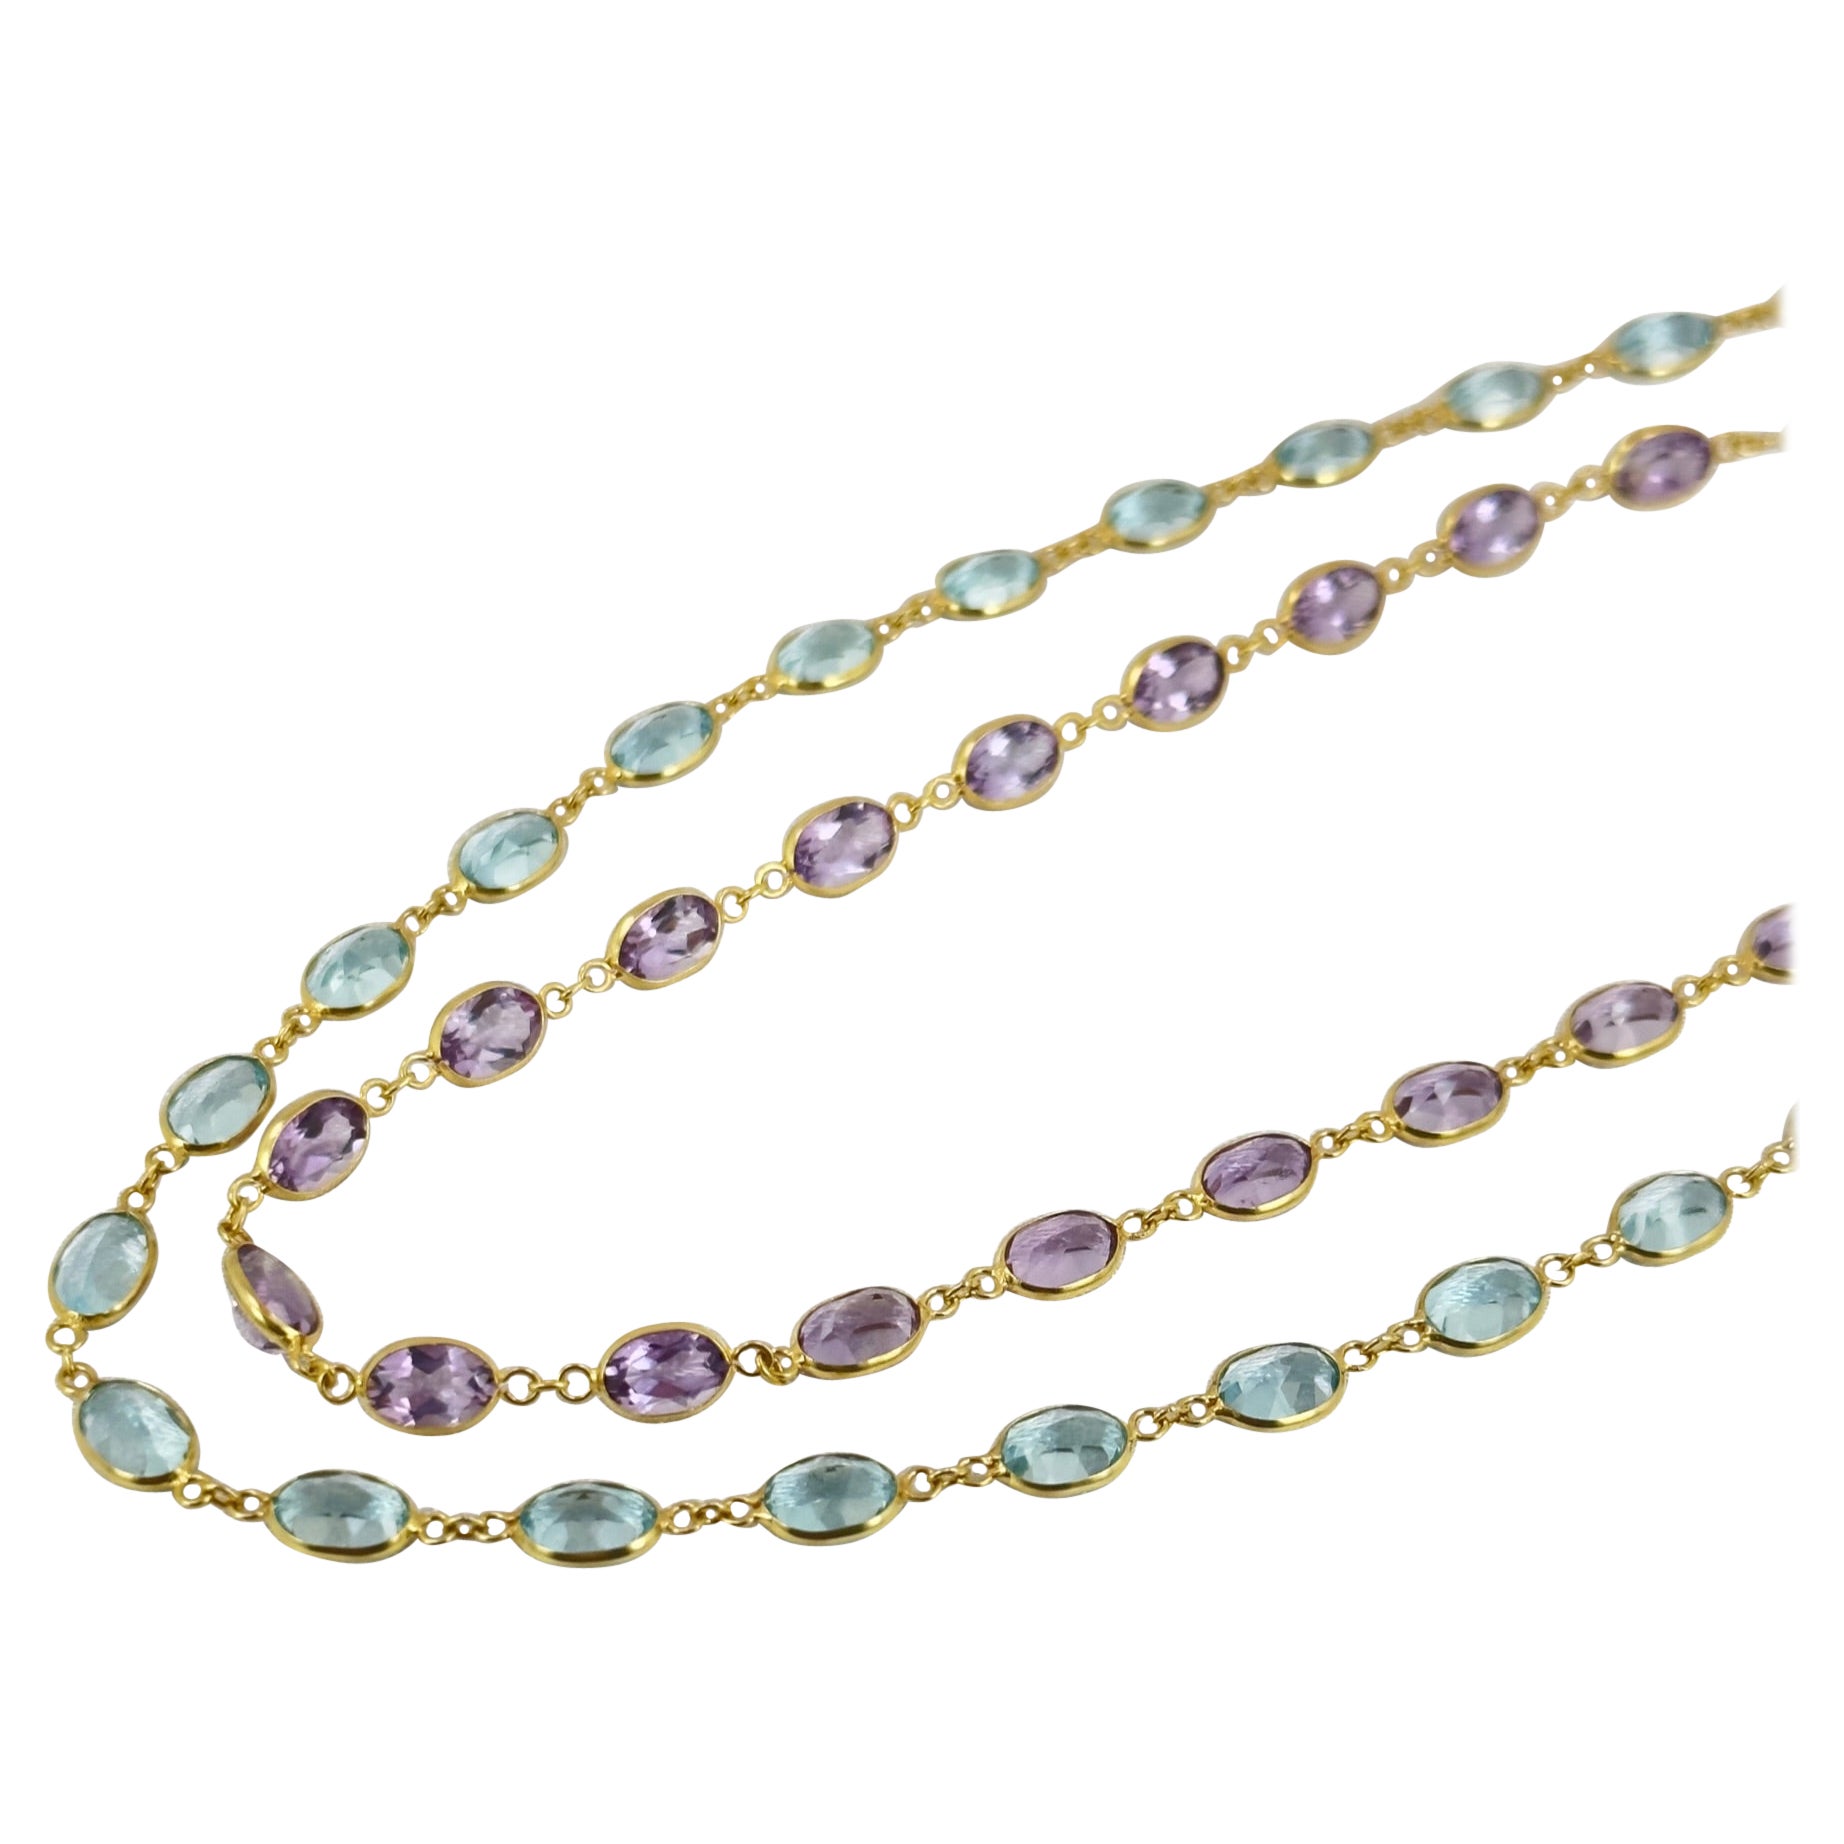 Oval Gemstone Tennis necklace

** Each item is sold separately **

Our brand new Amethyst and Blue topaz Tennis chains! Set in a dainty bezel setting, the color of the stones shines brighter because the light hits the stones from the top and